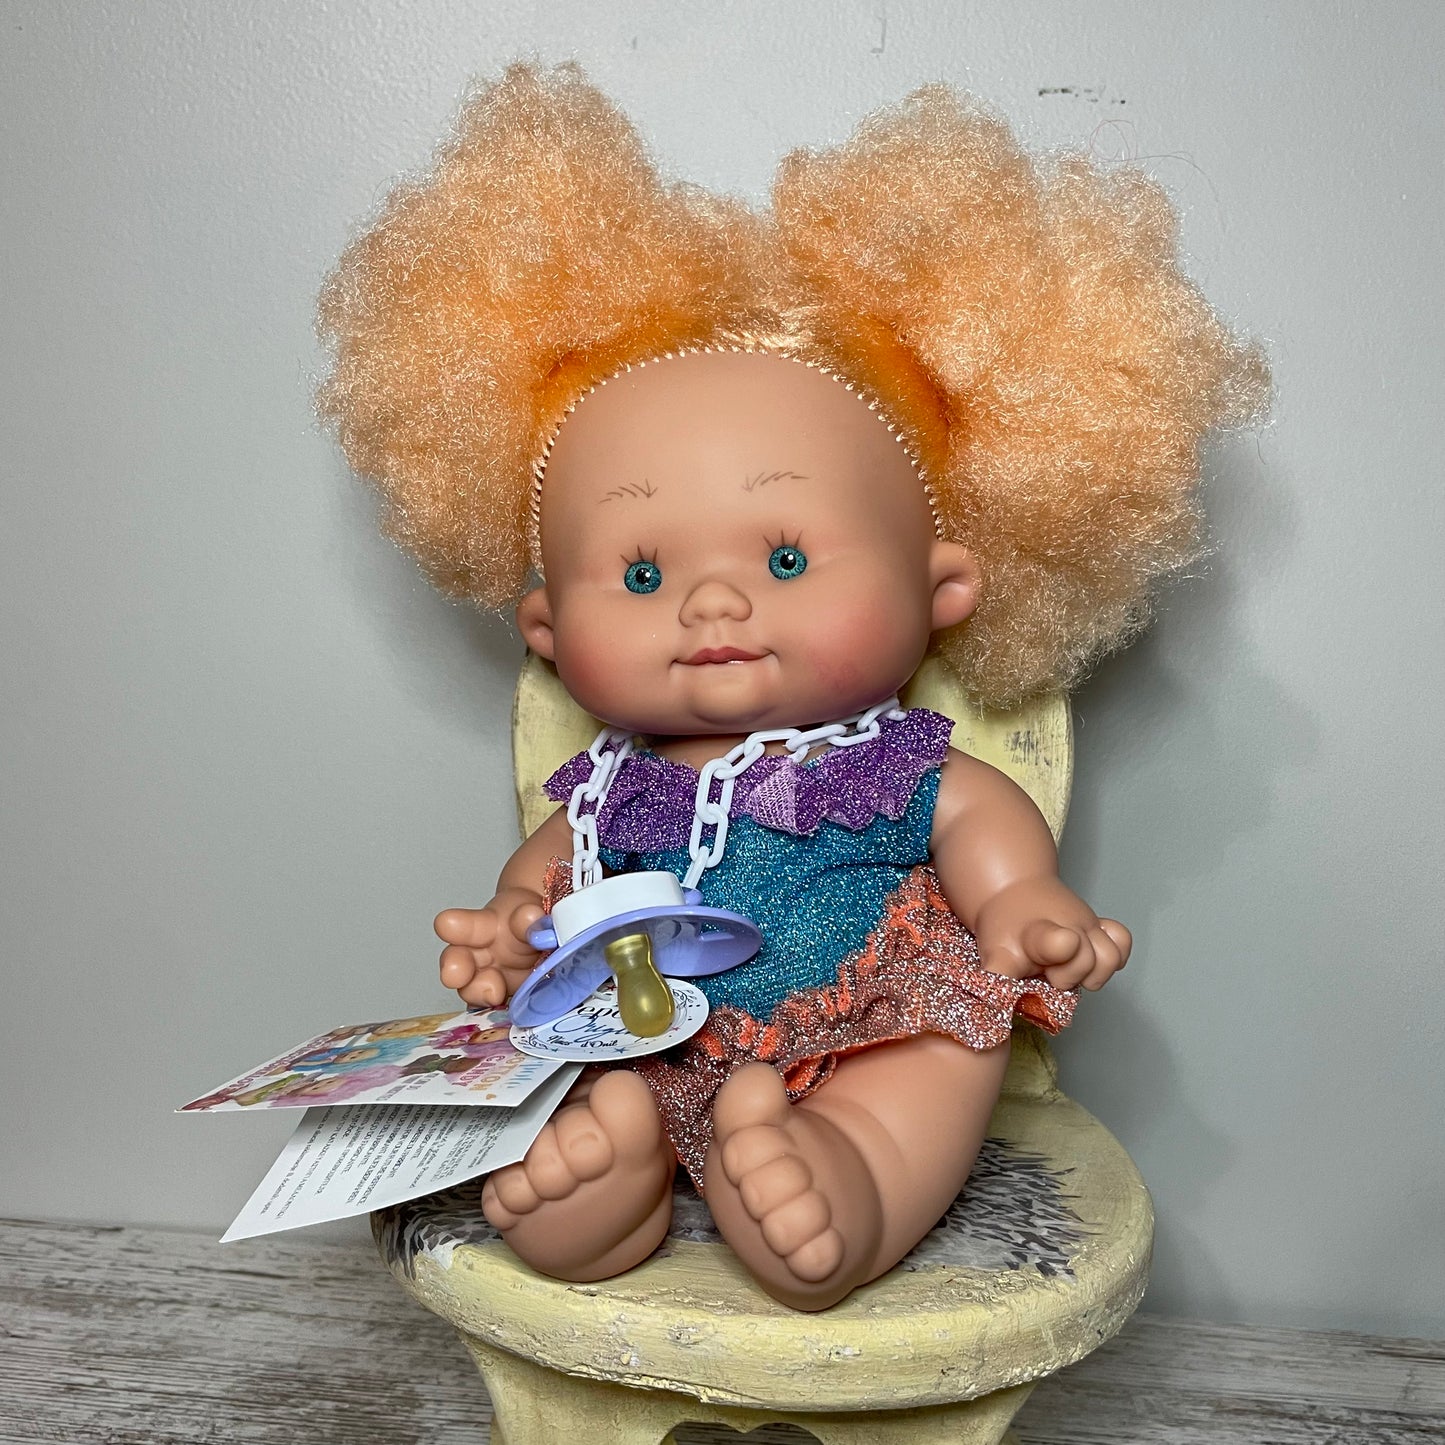 Pepote 10" Doll - Ginger